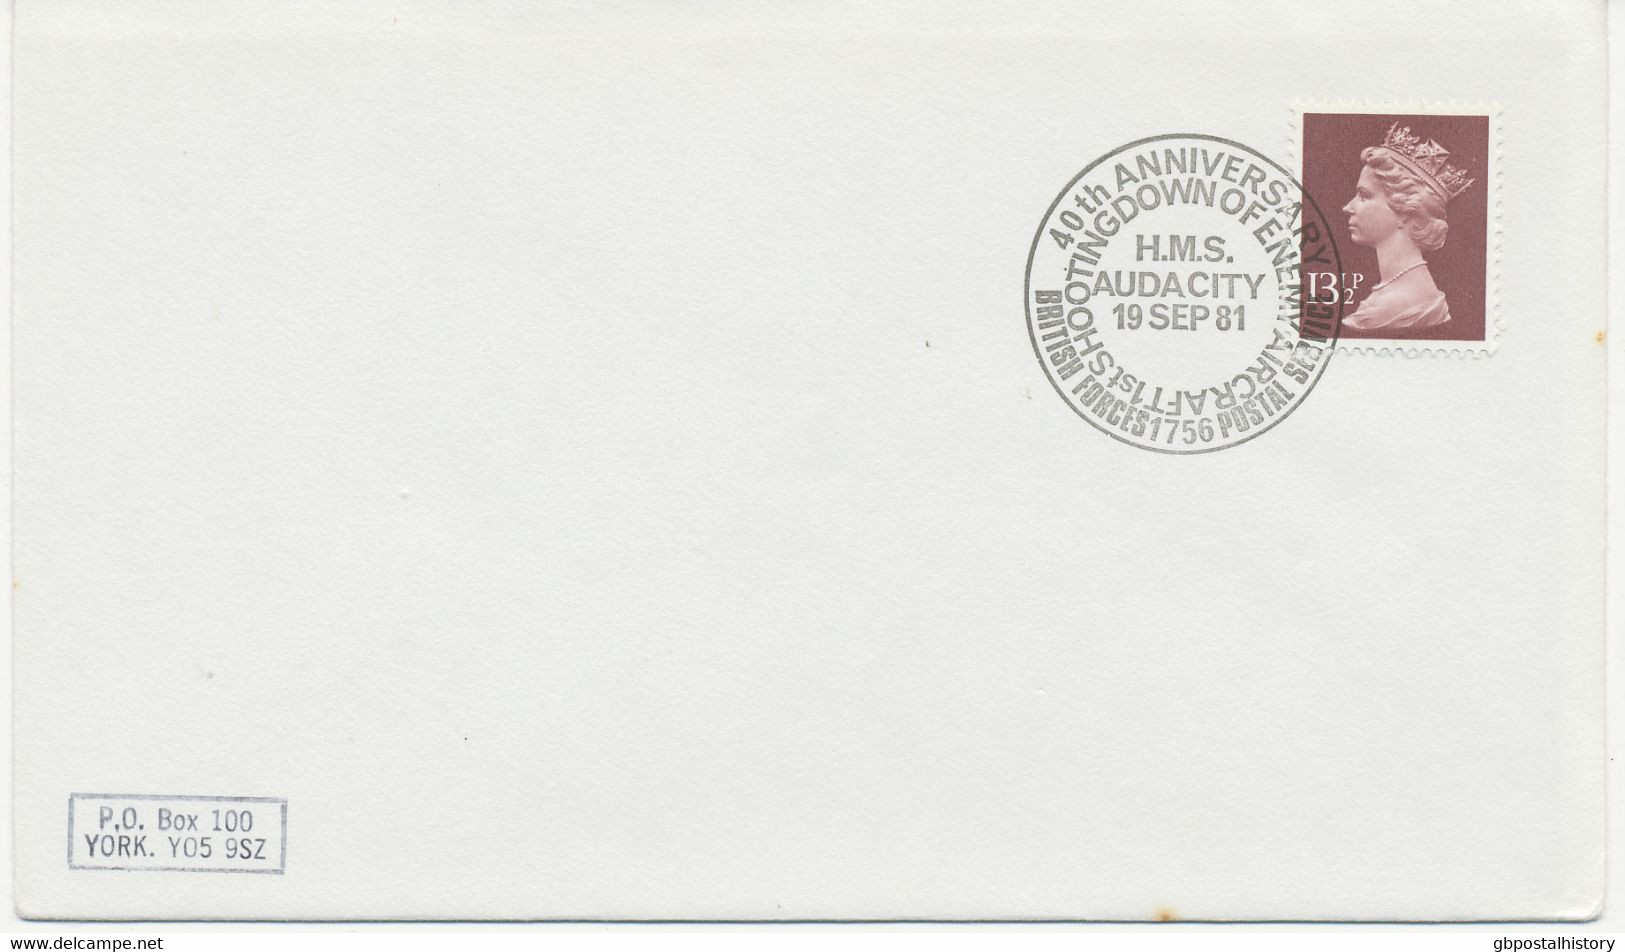 GB SPECIAL EVENT POSTMARKS 40th ANNIVERSARY 1st SHOOTING DOWN OF ENEMY AIRCRAFT H.M.S. AUDACITY 19 SEP 81 - BRITISH FORC - Marcofilie